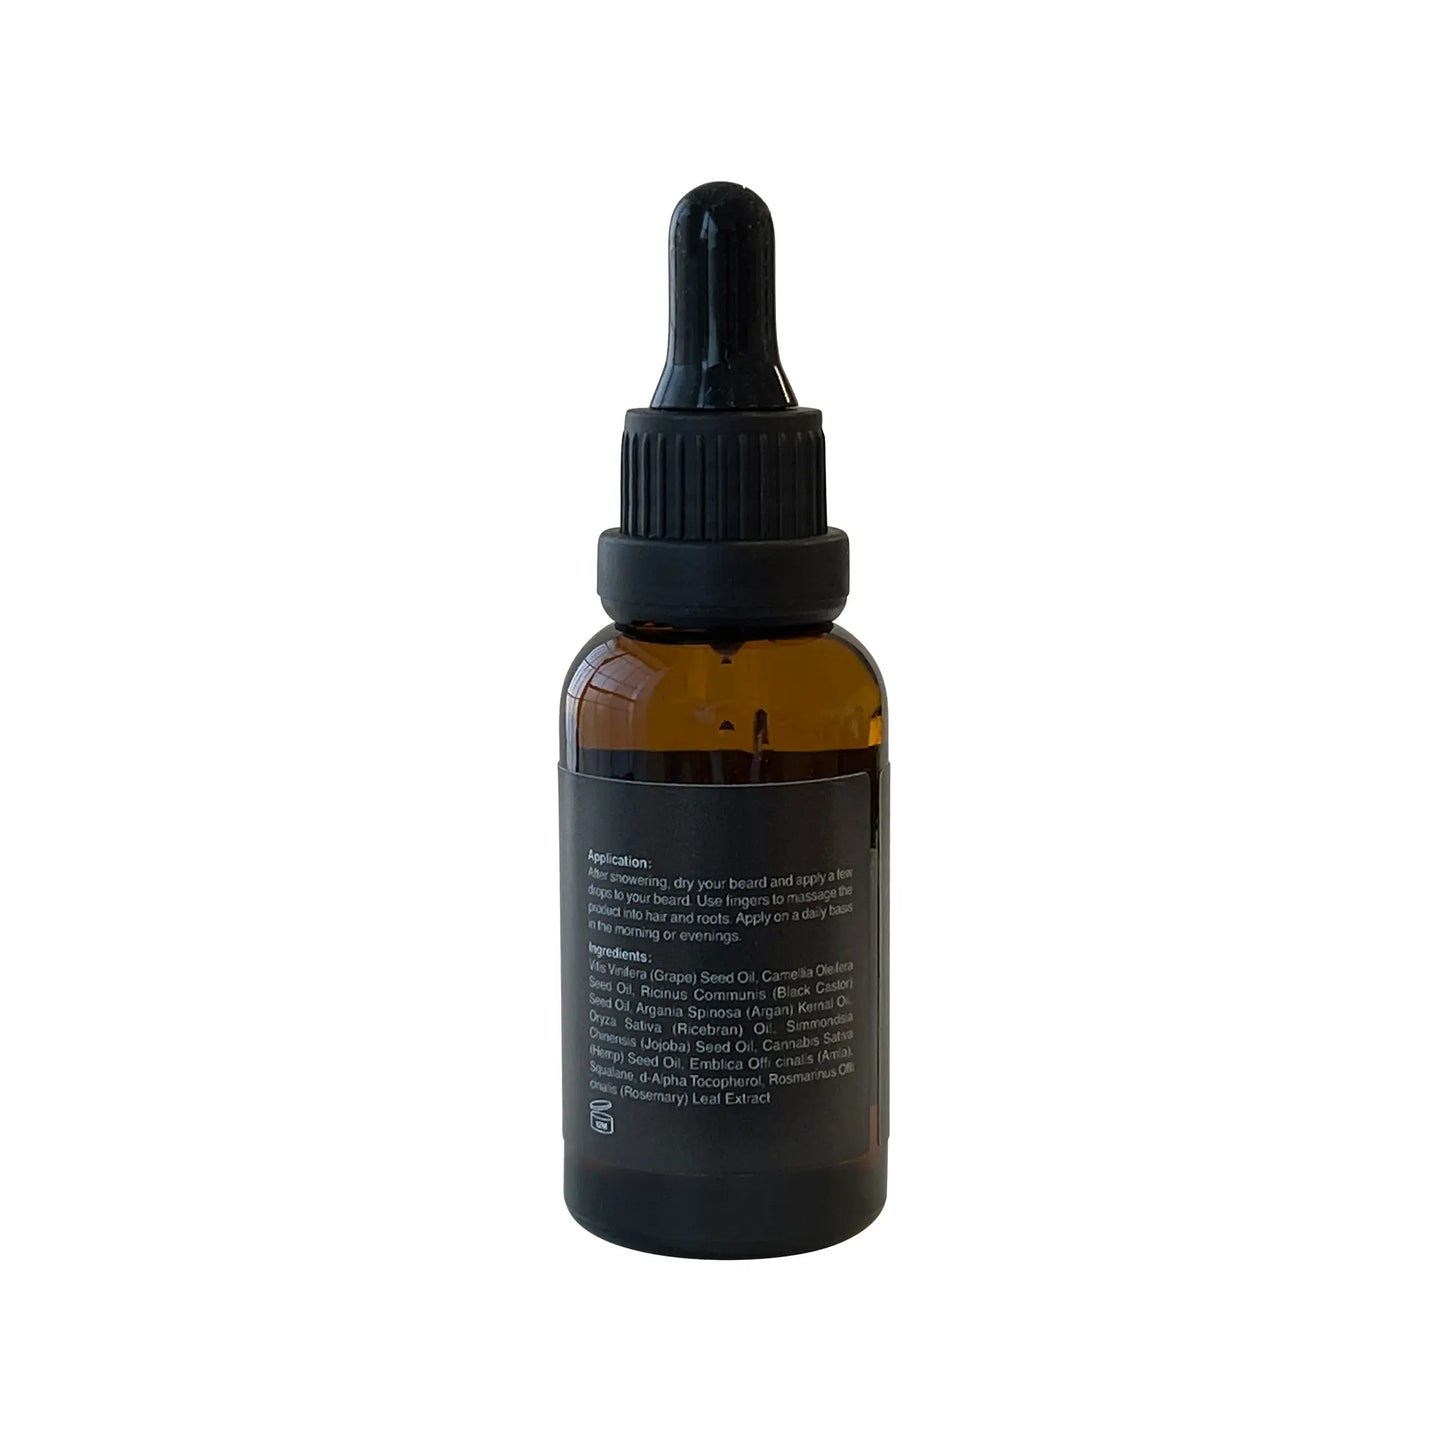 Experience the power of Cruisin Organics Hemp Beard Growth Oil. Formulated with natural ingredients like squalane, known to promote hair growth and fight bacteria,. Watch your beard grow and shine with our unscented oil. Say goodbye to clogged pores and hello to a healthier, fuller beard.